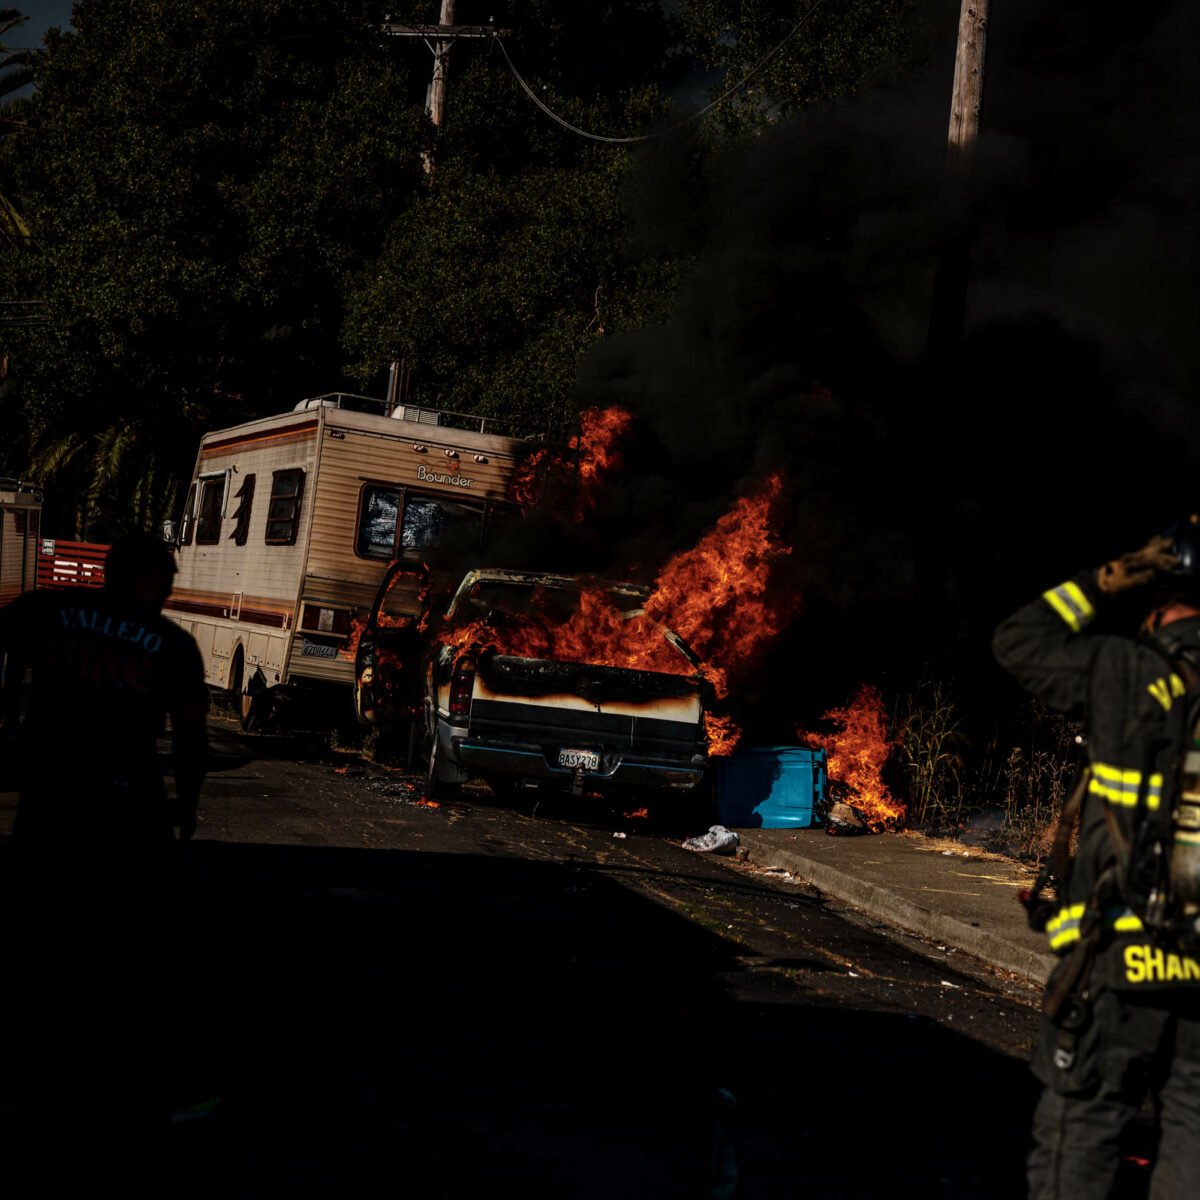 In pictures: Firefighters, neighbors stop vehicle fire that threatened homes